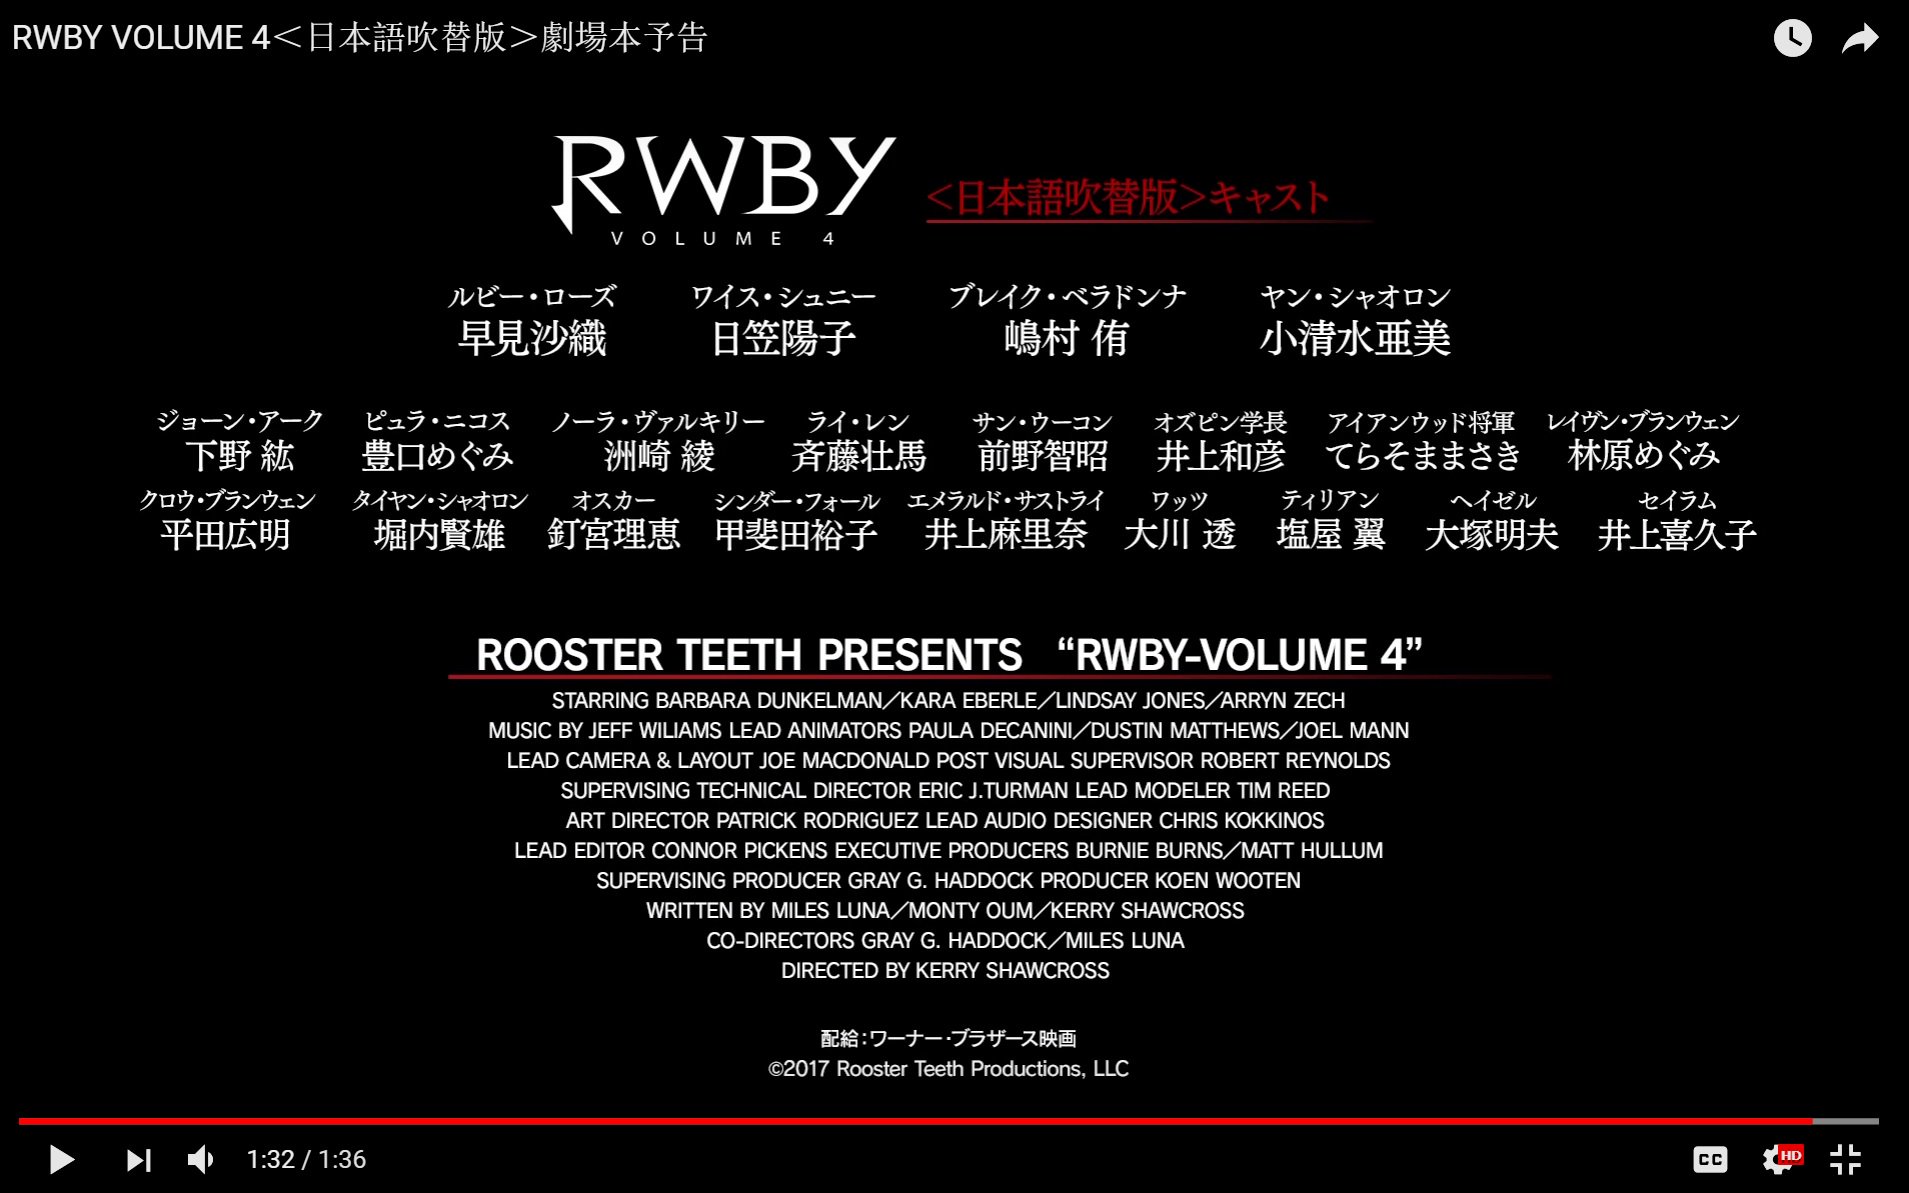 Neath Oum The Voice Actors For The New Cast In The Rwby Vol 4 Japanese Dub Wow Rwbyヴォリューム４日本語吹き替えに新しいキャストの声優たち やばい T Co D7v8g2drsl